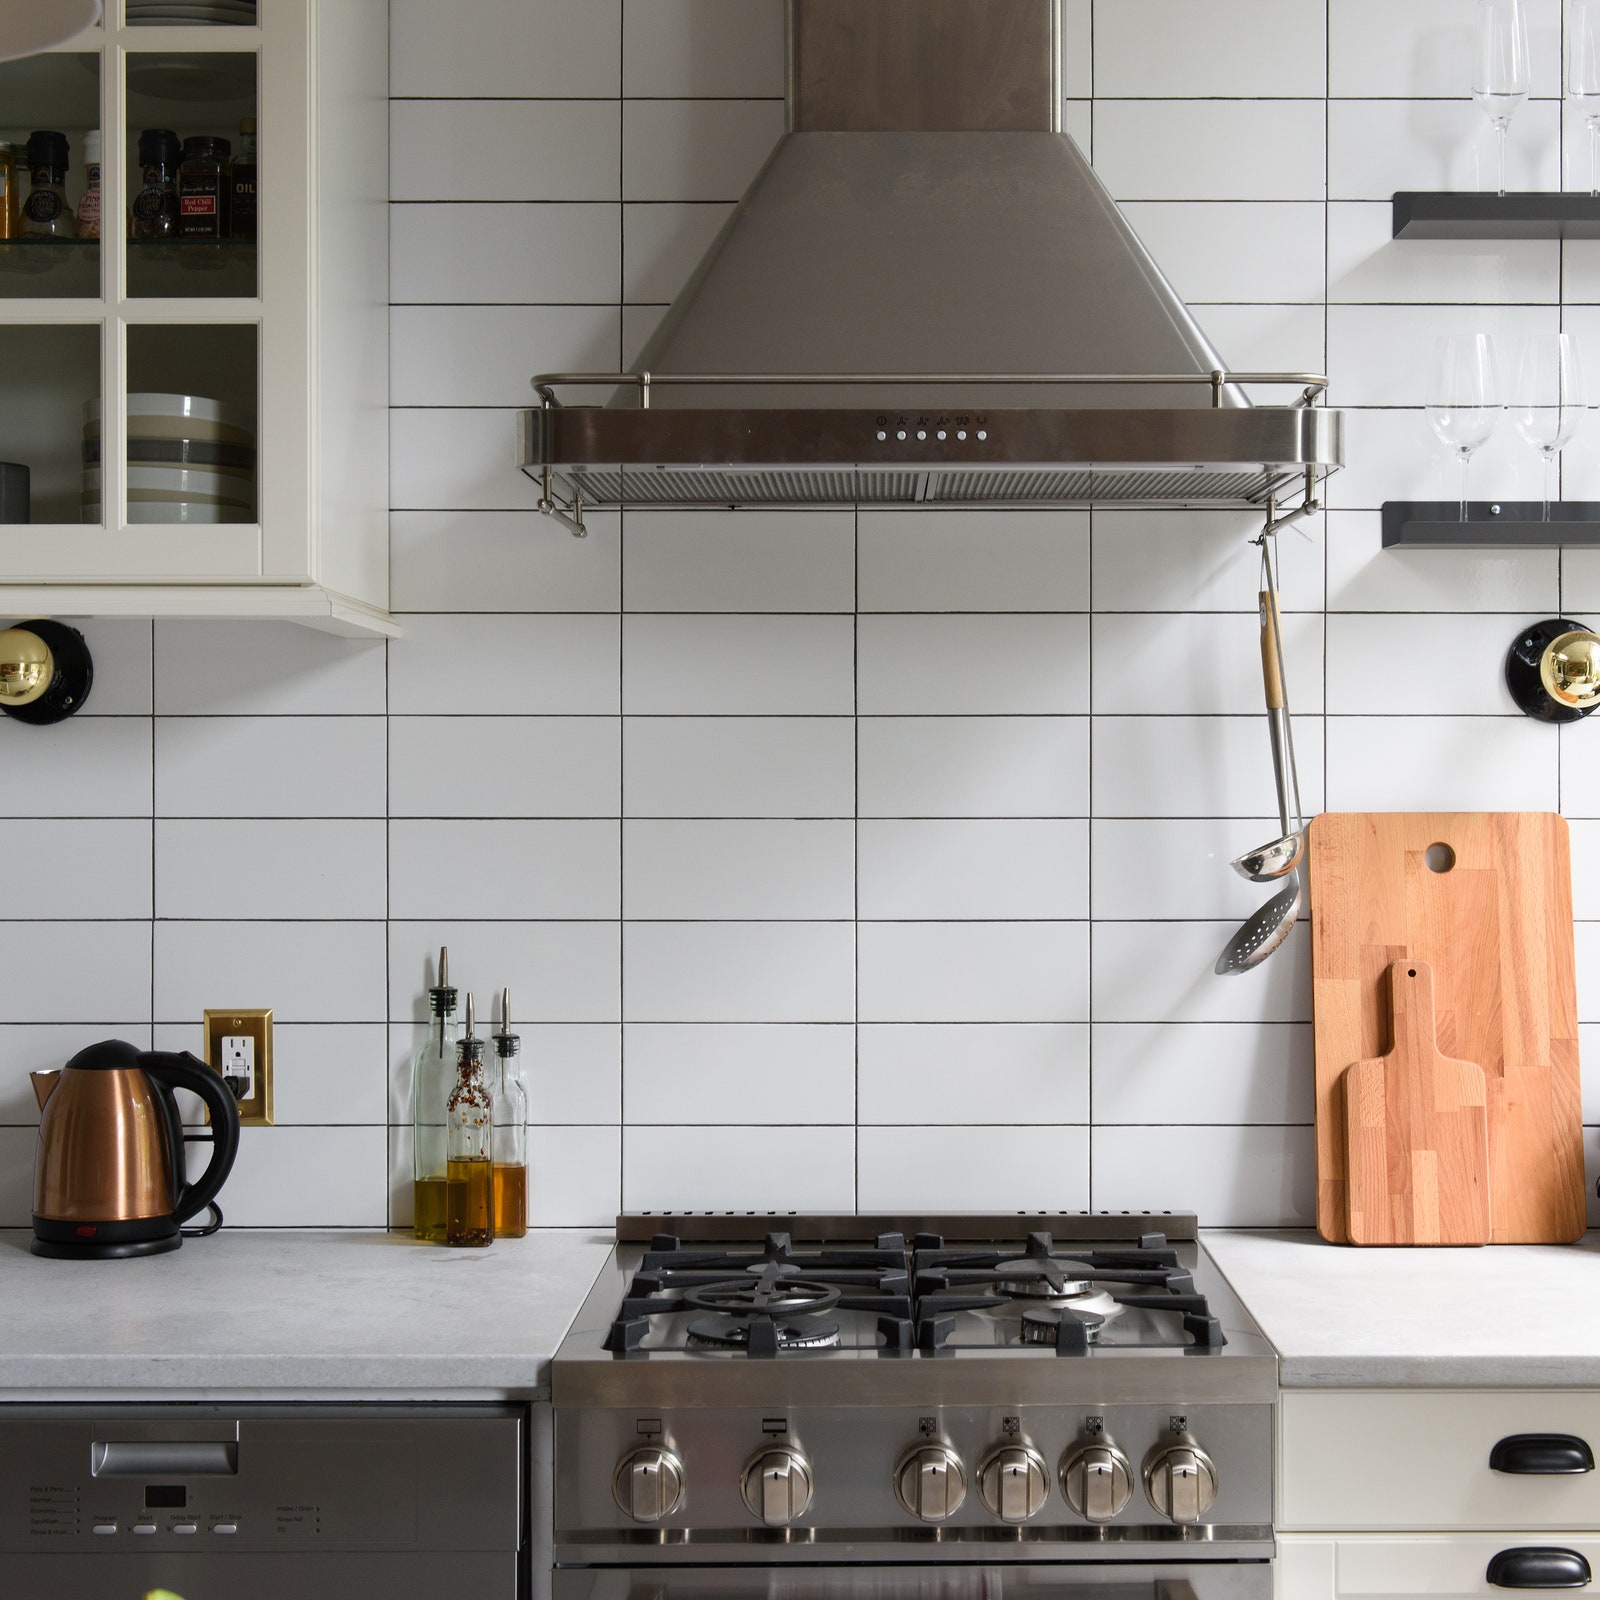 13 Kitchen Remodel Mistakes To Avoid According to Professional Designers